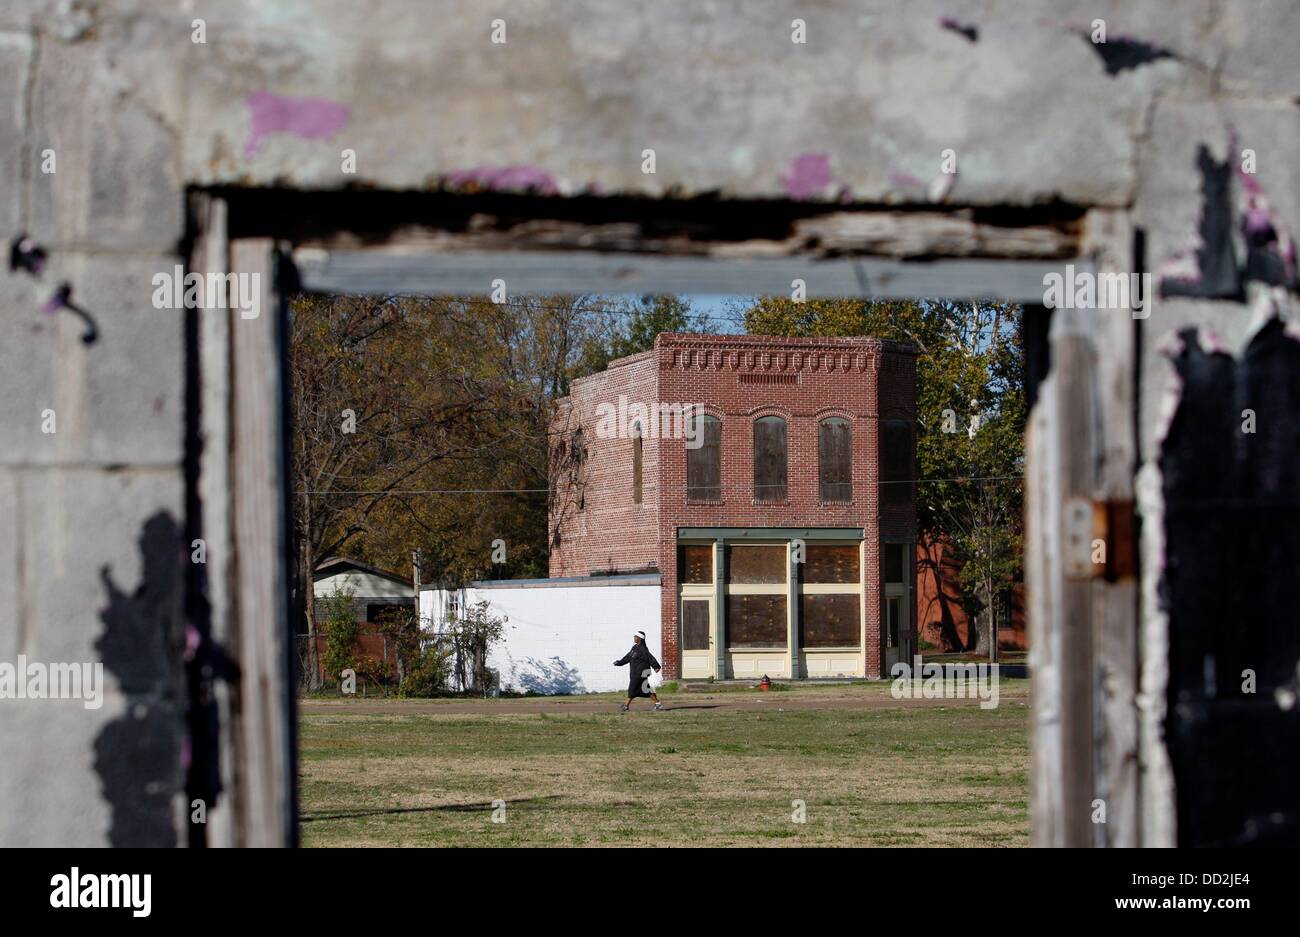 Nov. 17, 2012 - Mound Bayou, MS, U.S. - November 17, 2012 - The Mound Bayou Bank Building, built in 1904 to replace the original frame building,  is on the National Register of Historic Places. The bank was organized by Charles Banks, as one of the earliest black owned banks in Mississippi.  The building, at the corner of West Main Avenue and Green Street, is viewed from the remains of a building on East Main. The green space in between is where railroad tracks once came through town. Developed by local citizens and officials with the Mississippi Urban Forest Council, plans call for developing Stock Photo